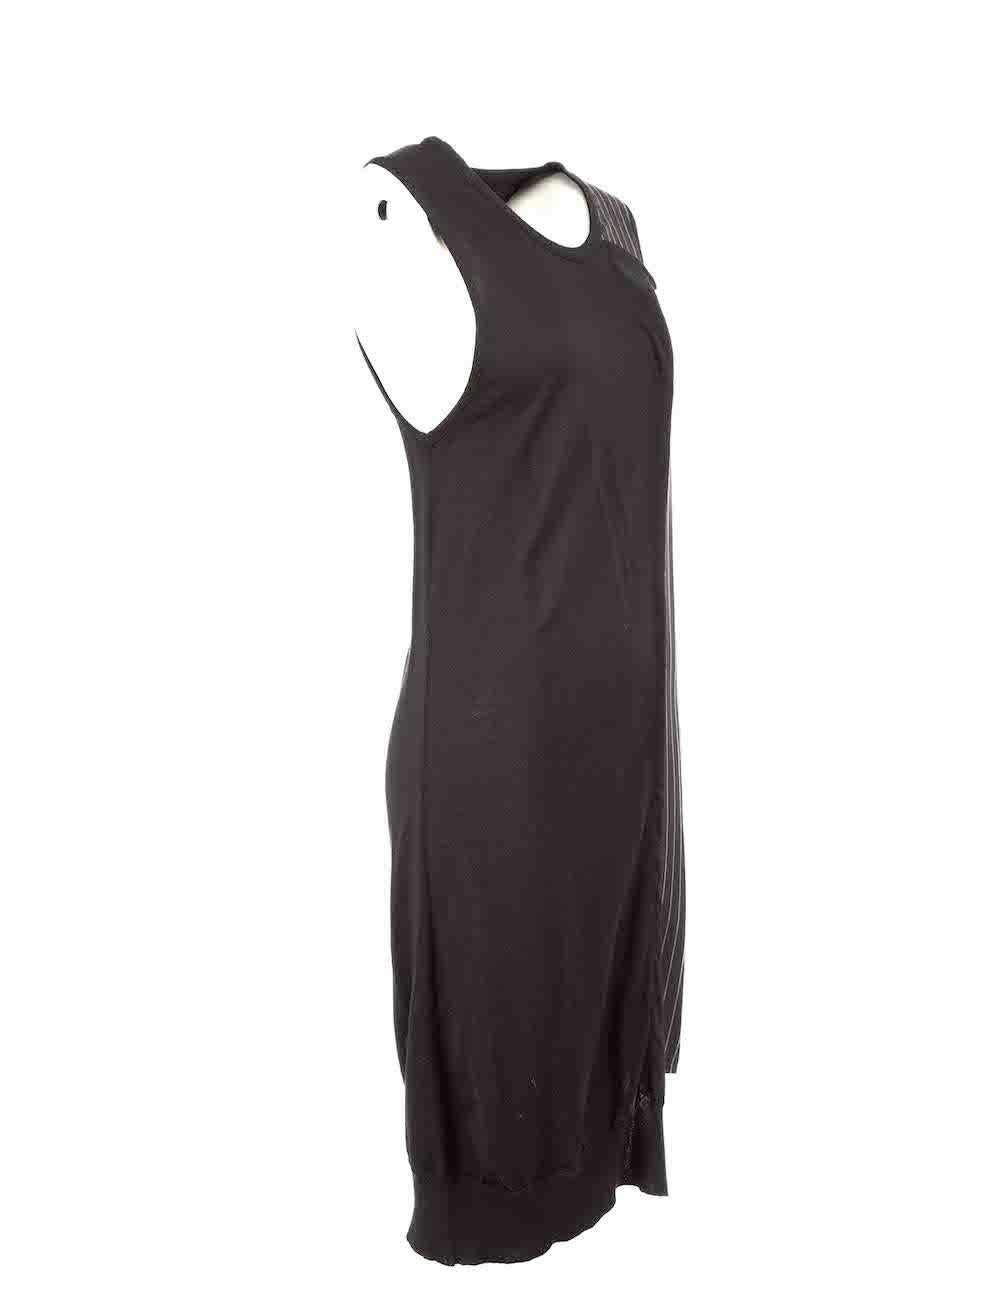 CONDITION is Good. Minor wear to dress is evident. Light wear to knit with one or two negligible plucks found at the front on this used Y's Yohji Yamamoto designer resale item.
 
Details
Black
Synthetic
Knit dress
Sleeveless
Round neck
Knee